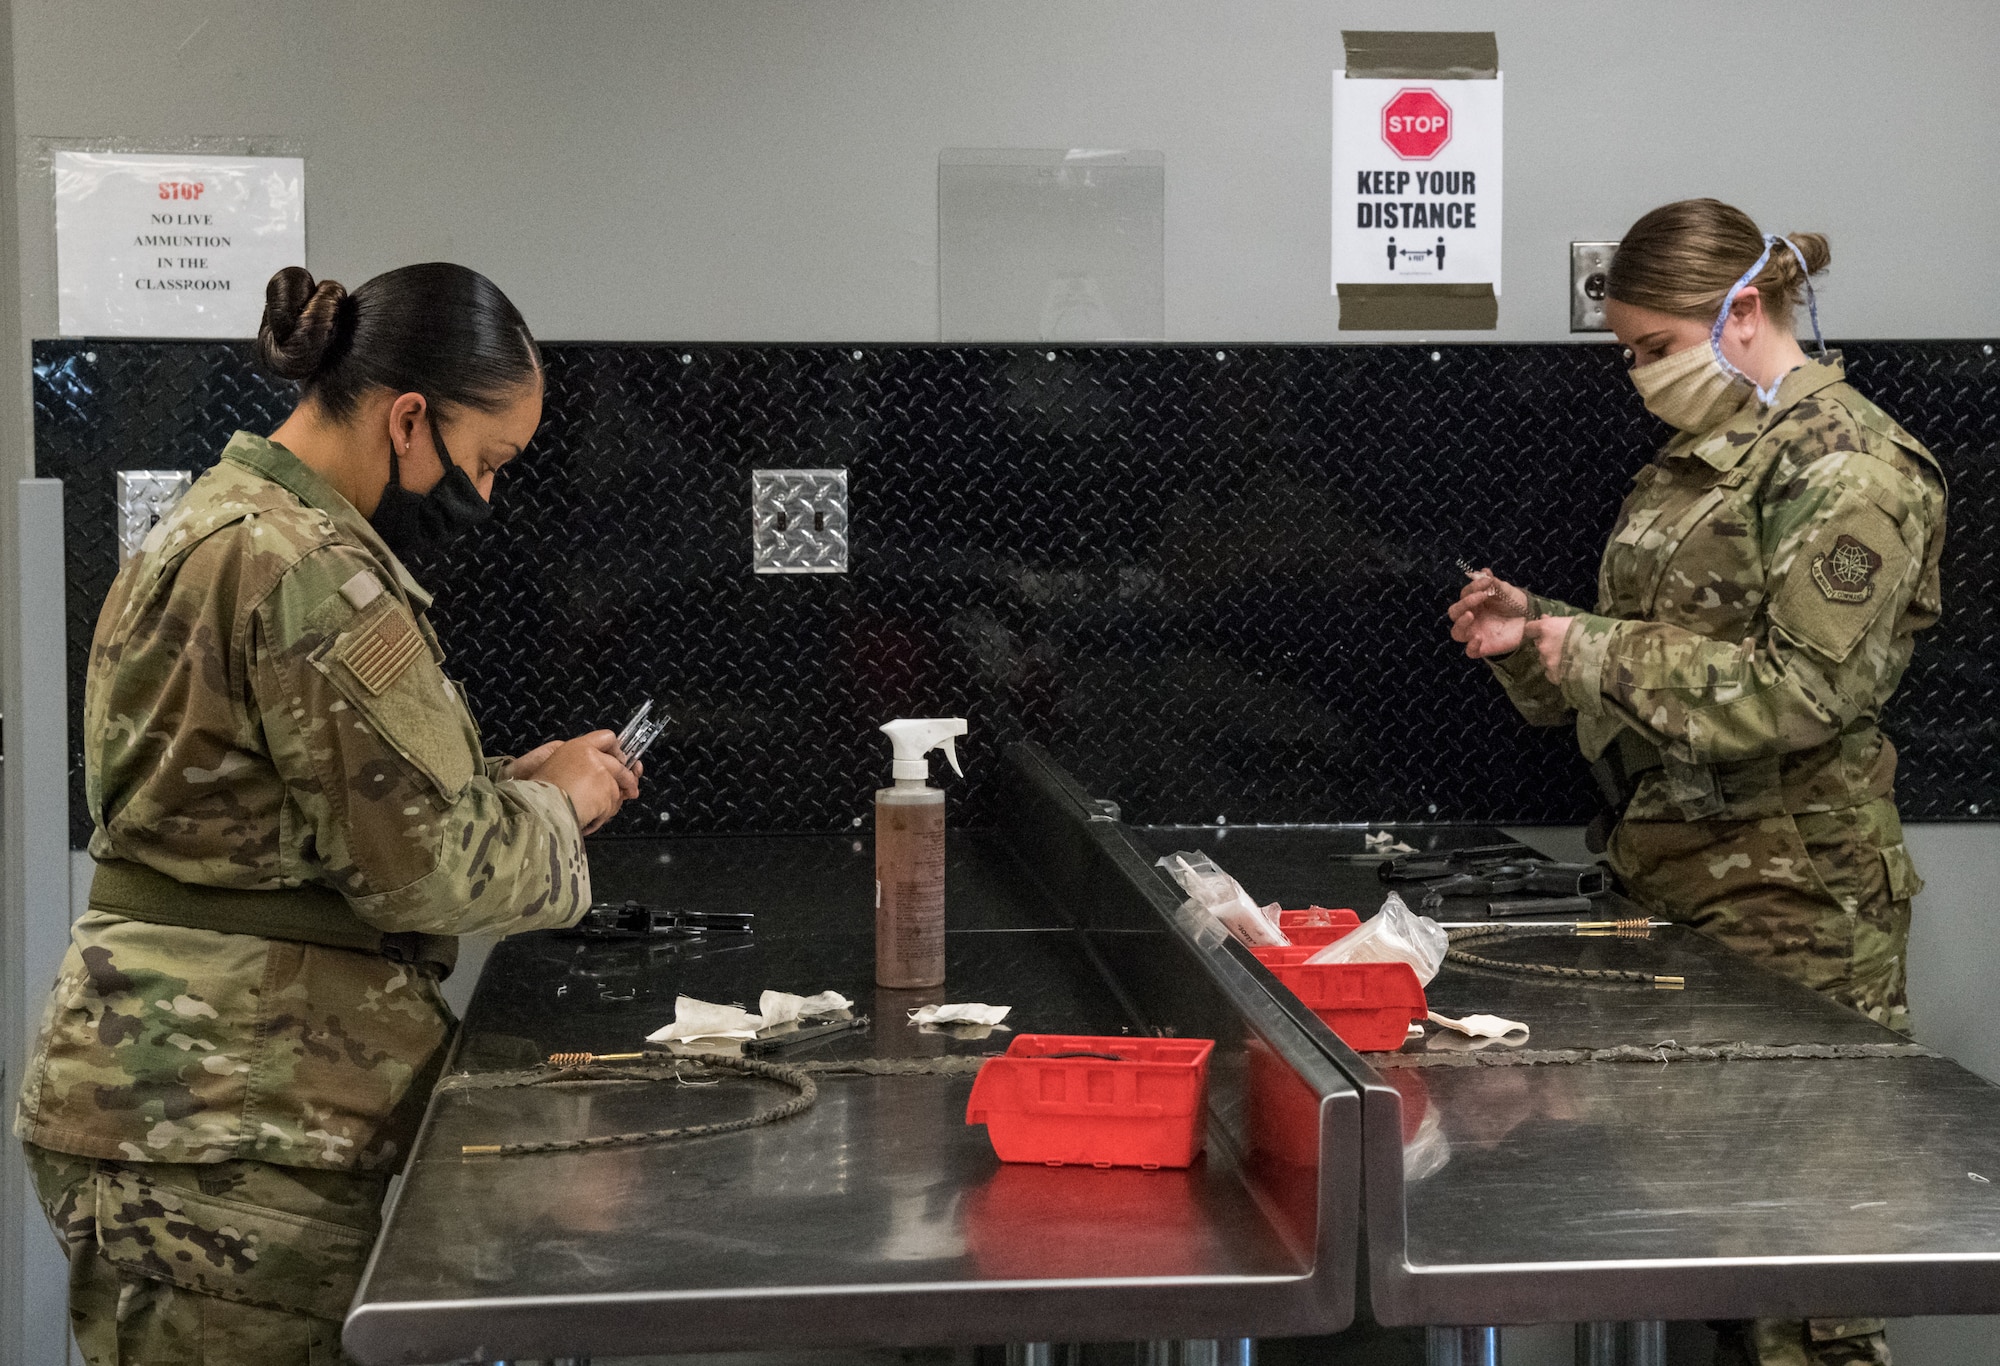 On the left, Staff Sgt. Adrianna Hernandez, 436th Airlift Wing equal opportunity advisor, and Airman 1st Class Kaleigh O’Hara, 436th Comptroller Squadron budget analyst, clean their M9 weapons after qualifying on May 13, 2020, at Dover Air Force Base, Delaware. Hernandez and O’Hara adhered to social distancing guidelines while attending a Combat Arms Training and Maintenance class for the M4 and M9. A shelter-in place order was issued in mid-March to help mitigate the spread of COVID-19. (U.S. Air Force photo by Roland Balik)